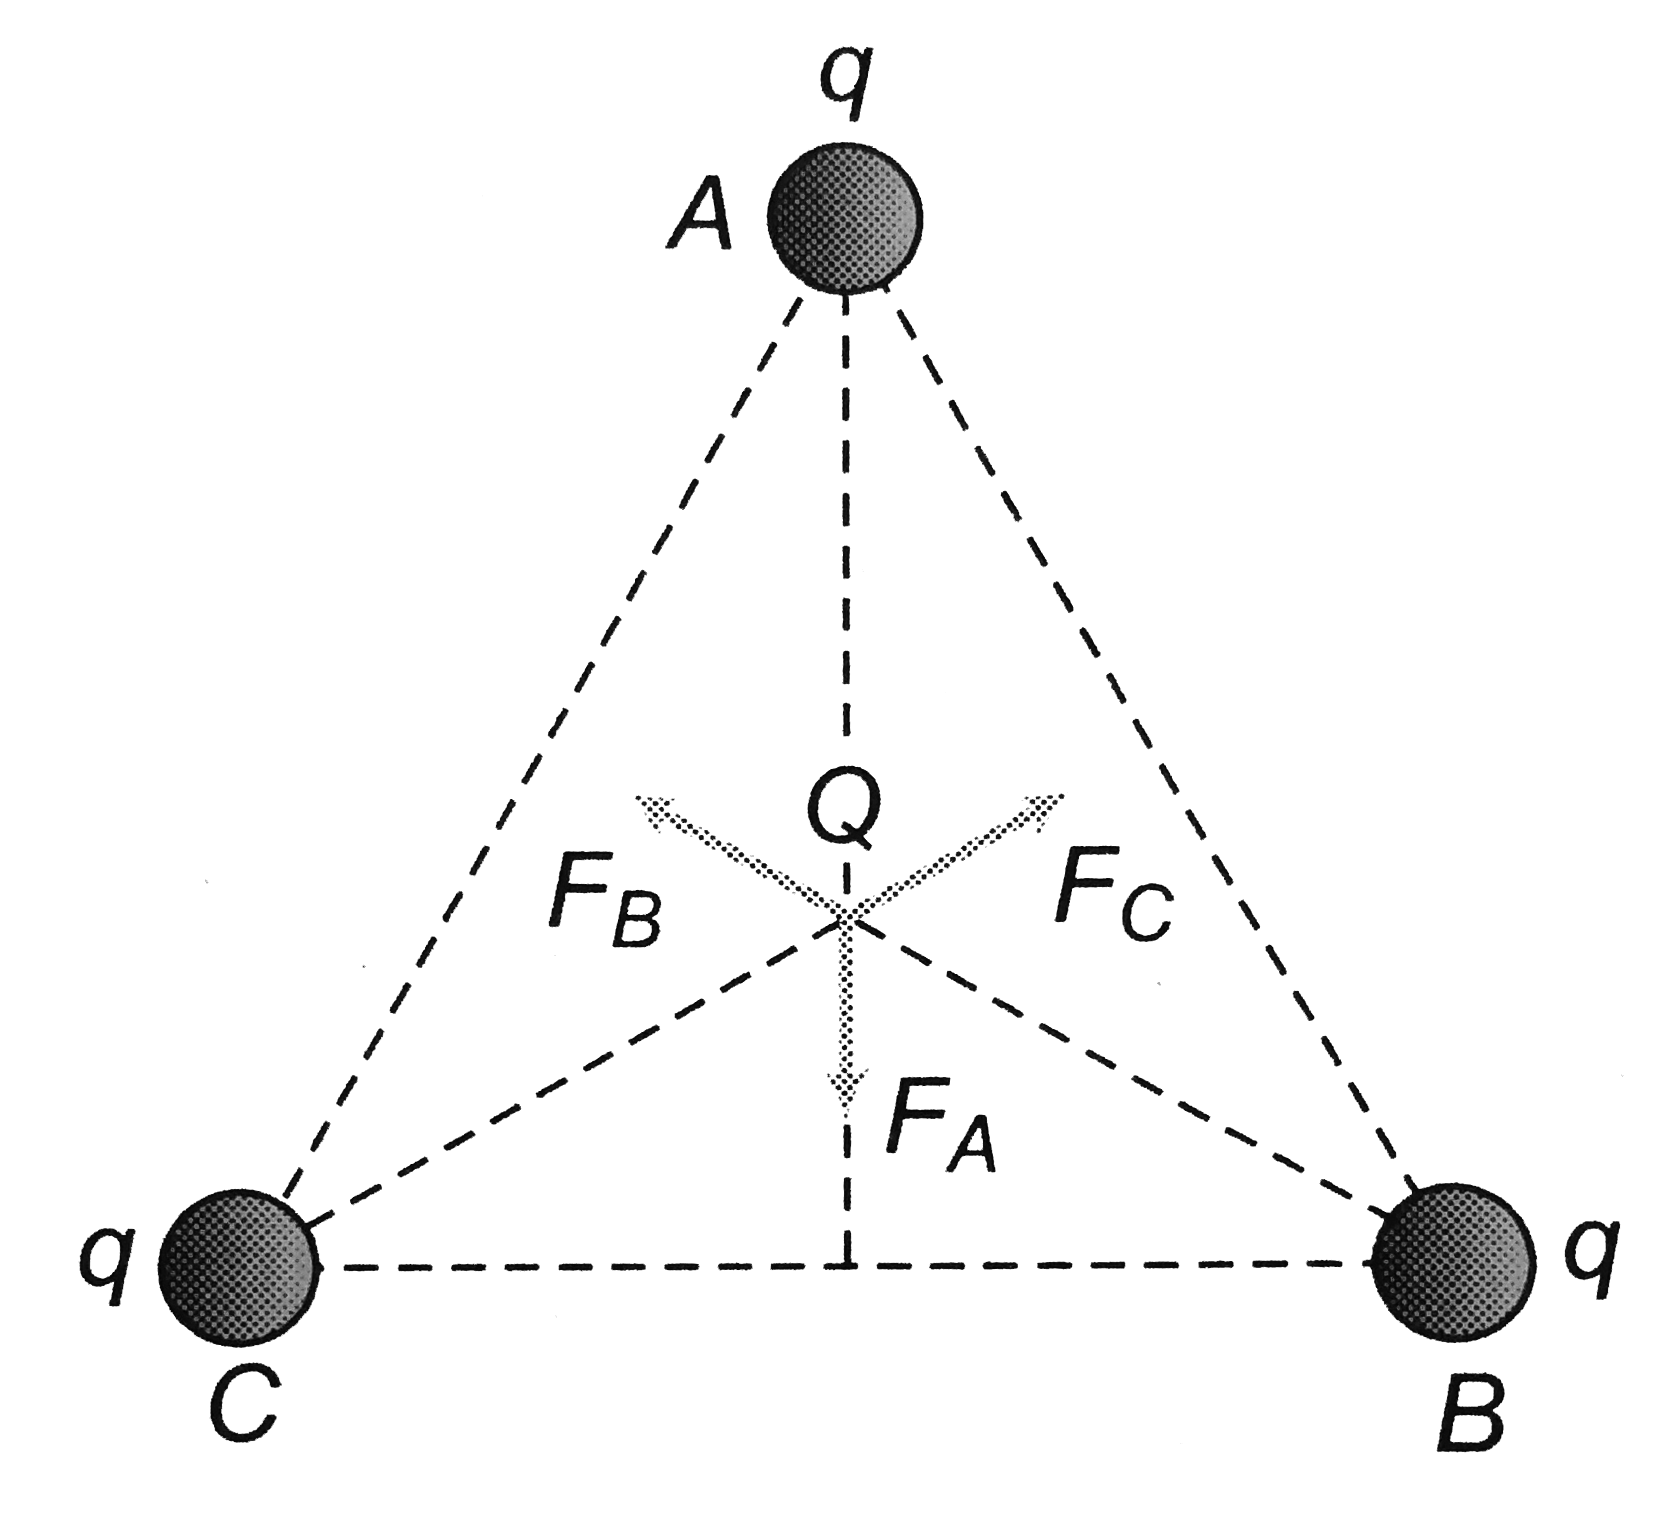 Three charges each of magnitude q are placed at the corners of an equilateral triangle, the electrostatic force on the charge place at the centre is (each side of triangle is L)